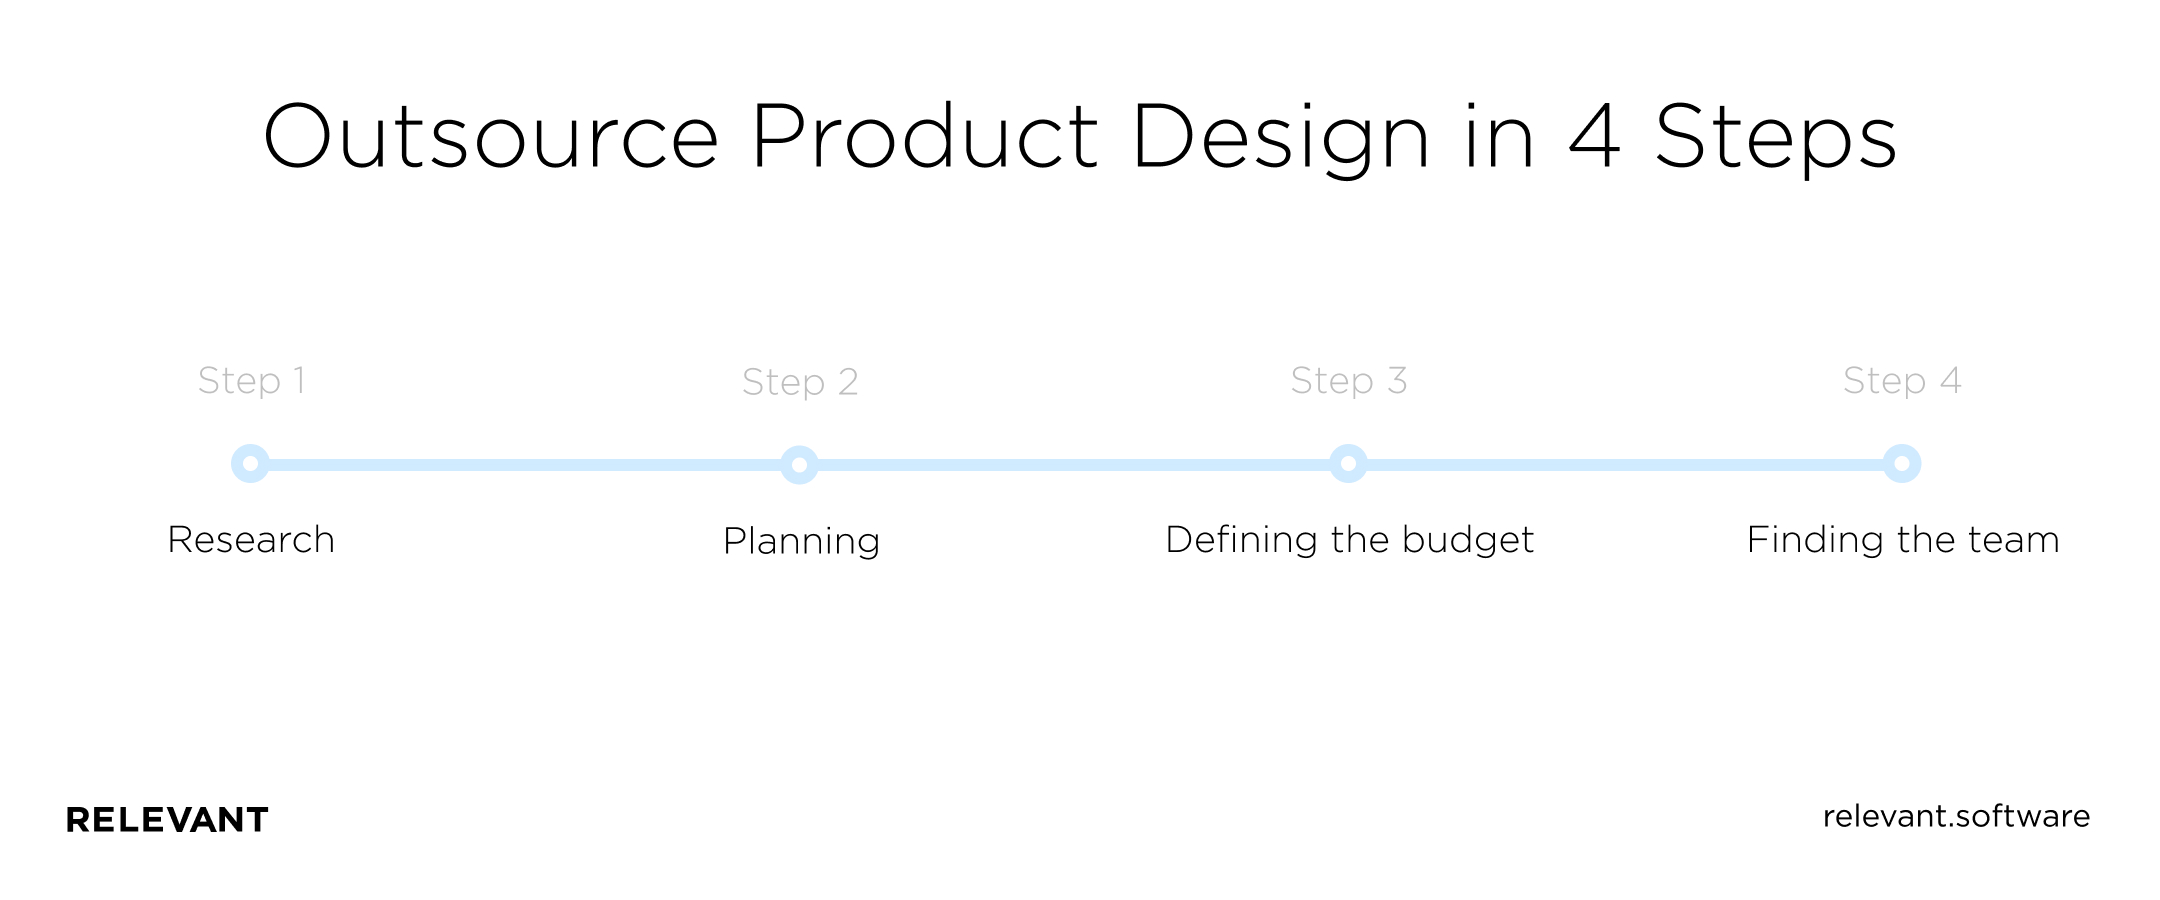 Outsource Product Design in 4 Steps